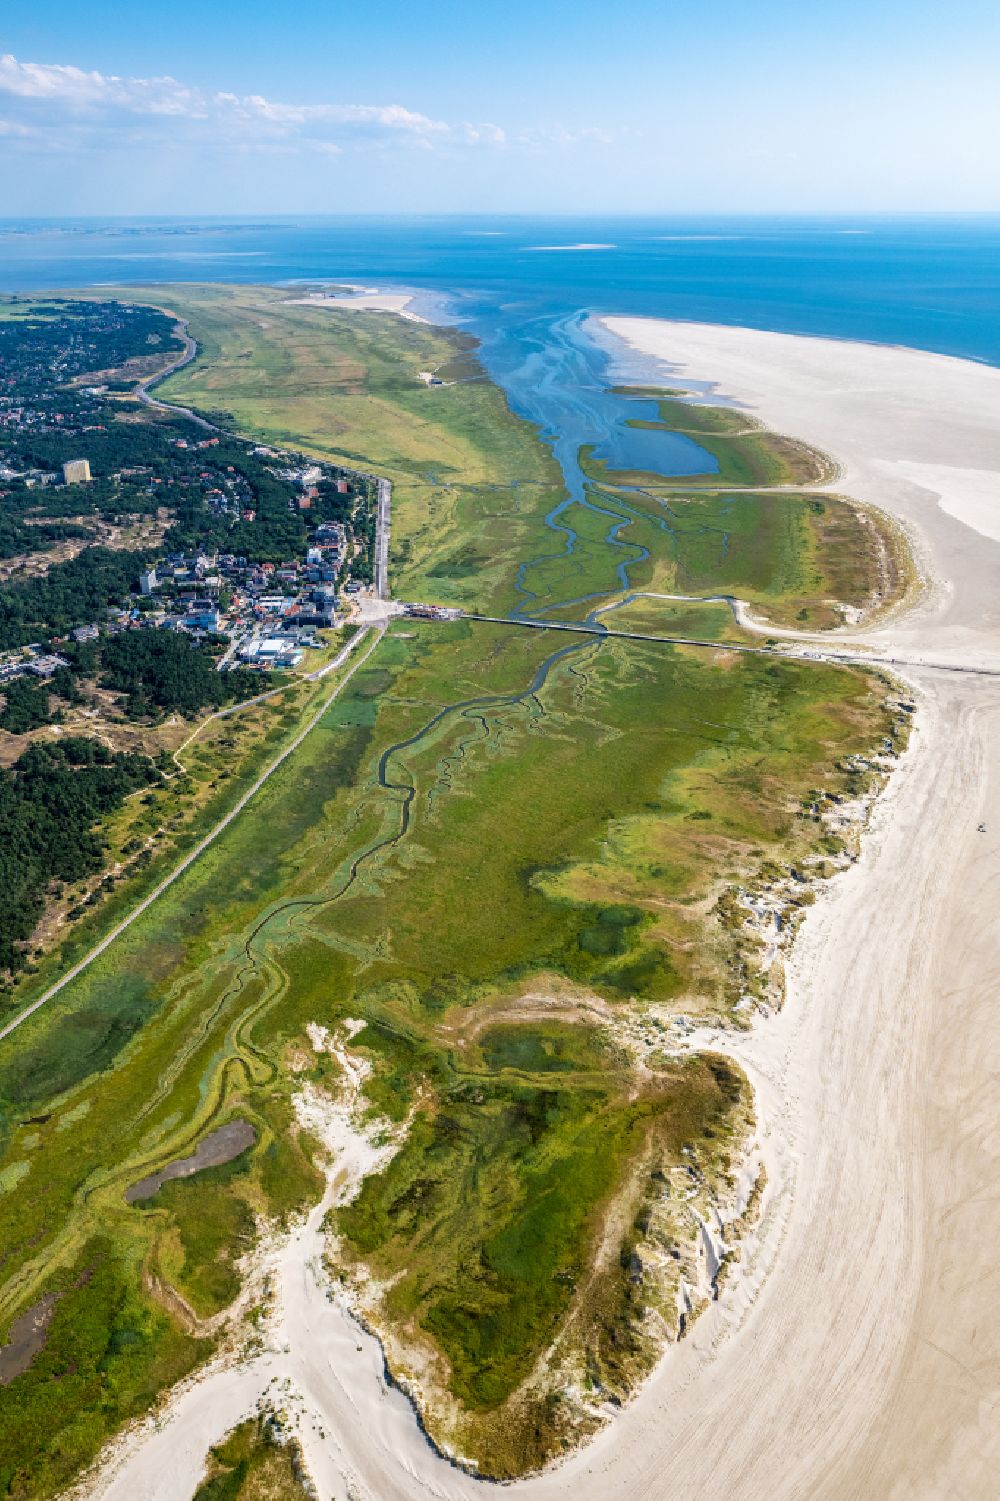 Aerial image Sankt Peter-Ording - Sandy beach landscape on the North Sea - coast in the district of Sankt Peter-Ording Parking and gastronomy Die Seekiste in Sankt Peter-Ording in Schleswig-Holstein